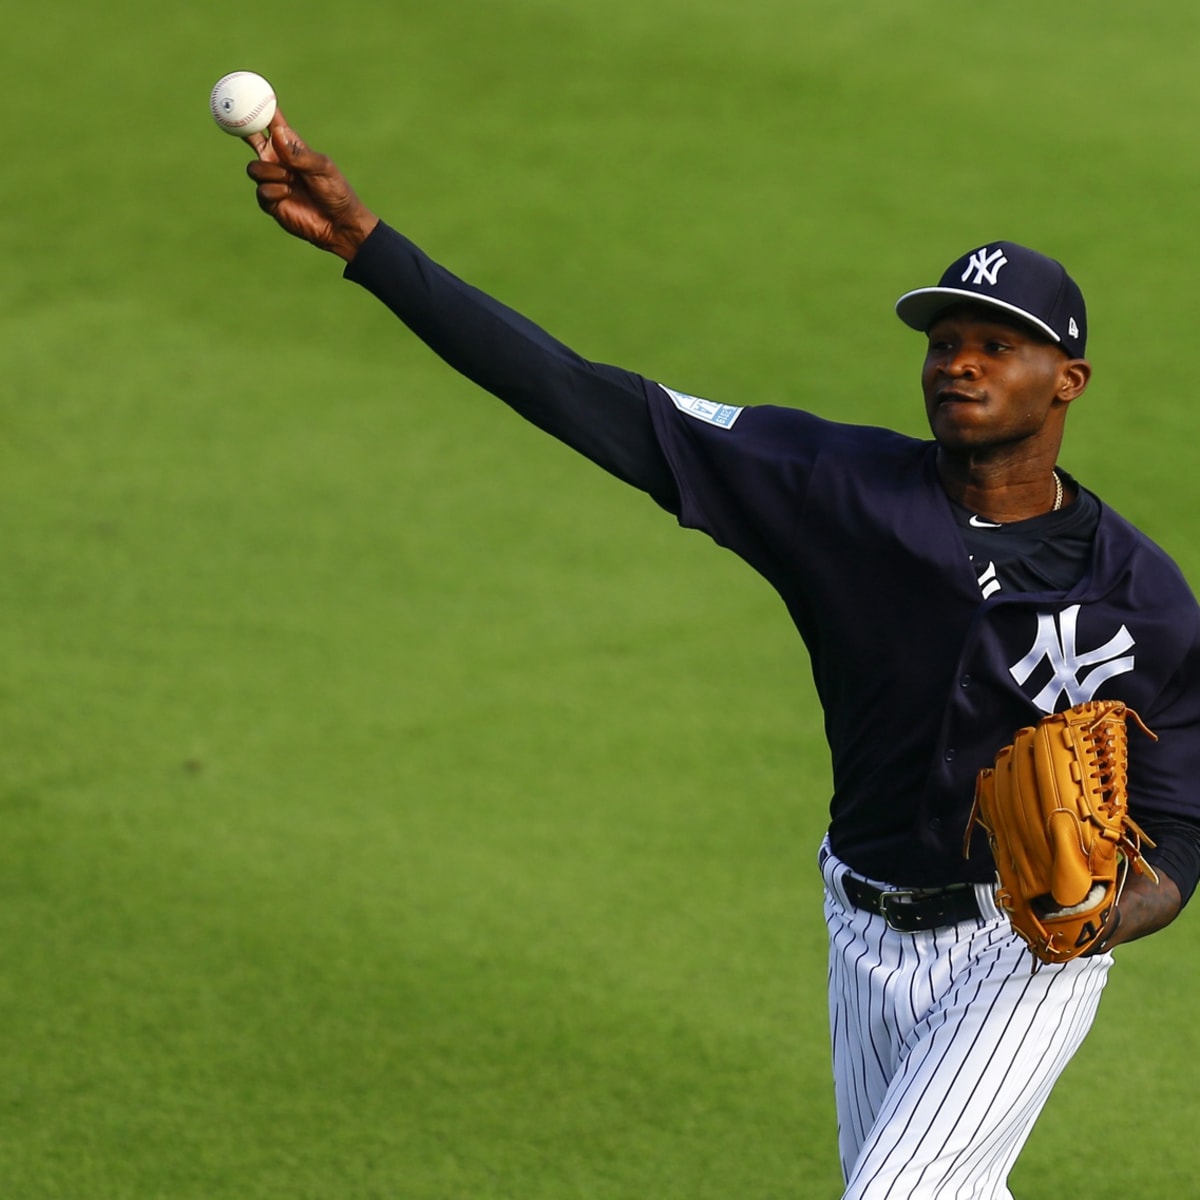 Conflict in cheering Yankees' pitcher Domingo Germán's perfect